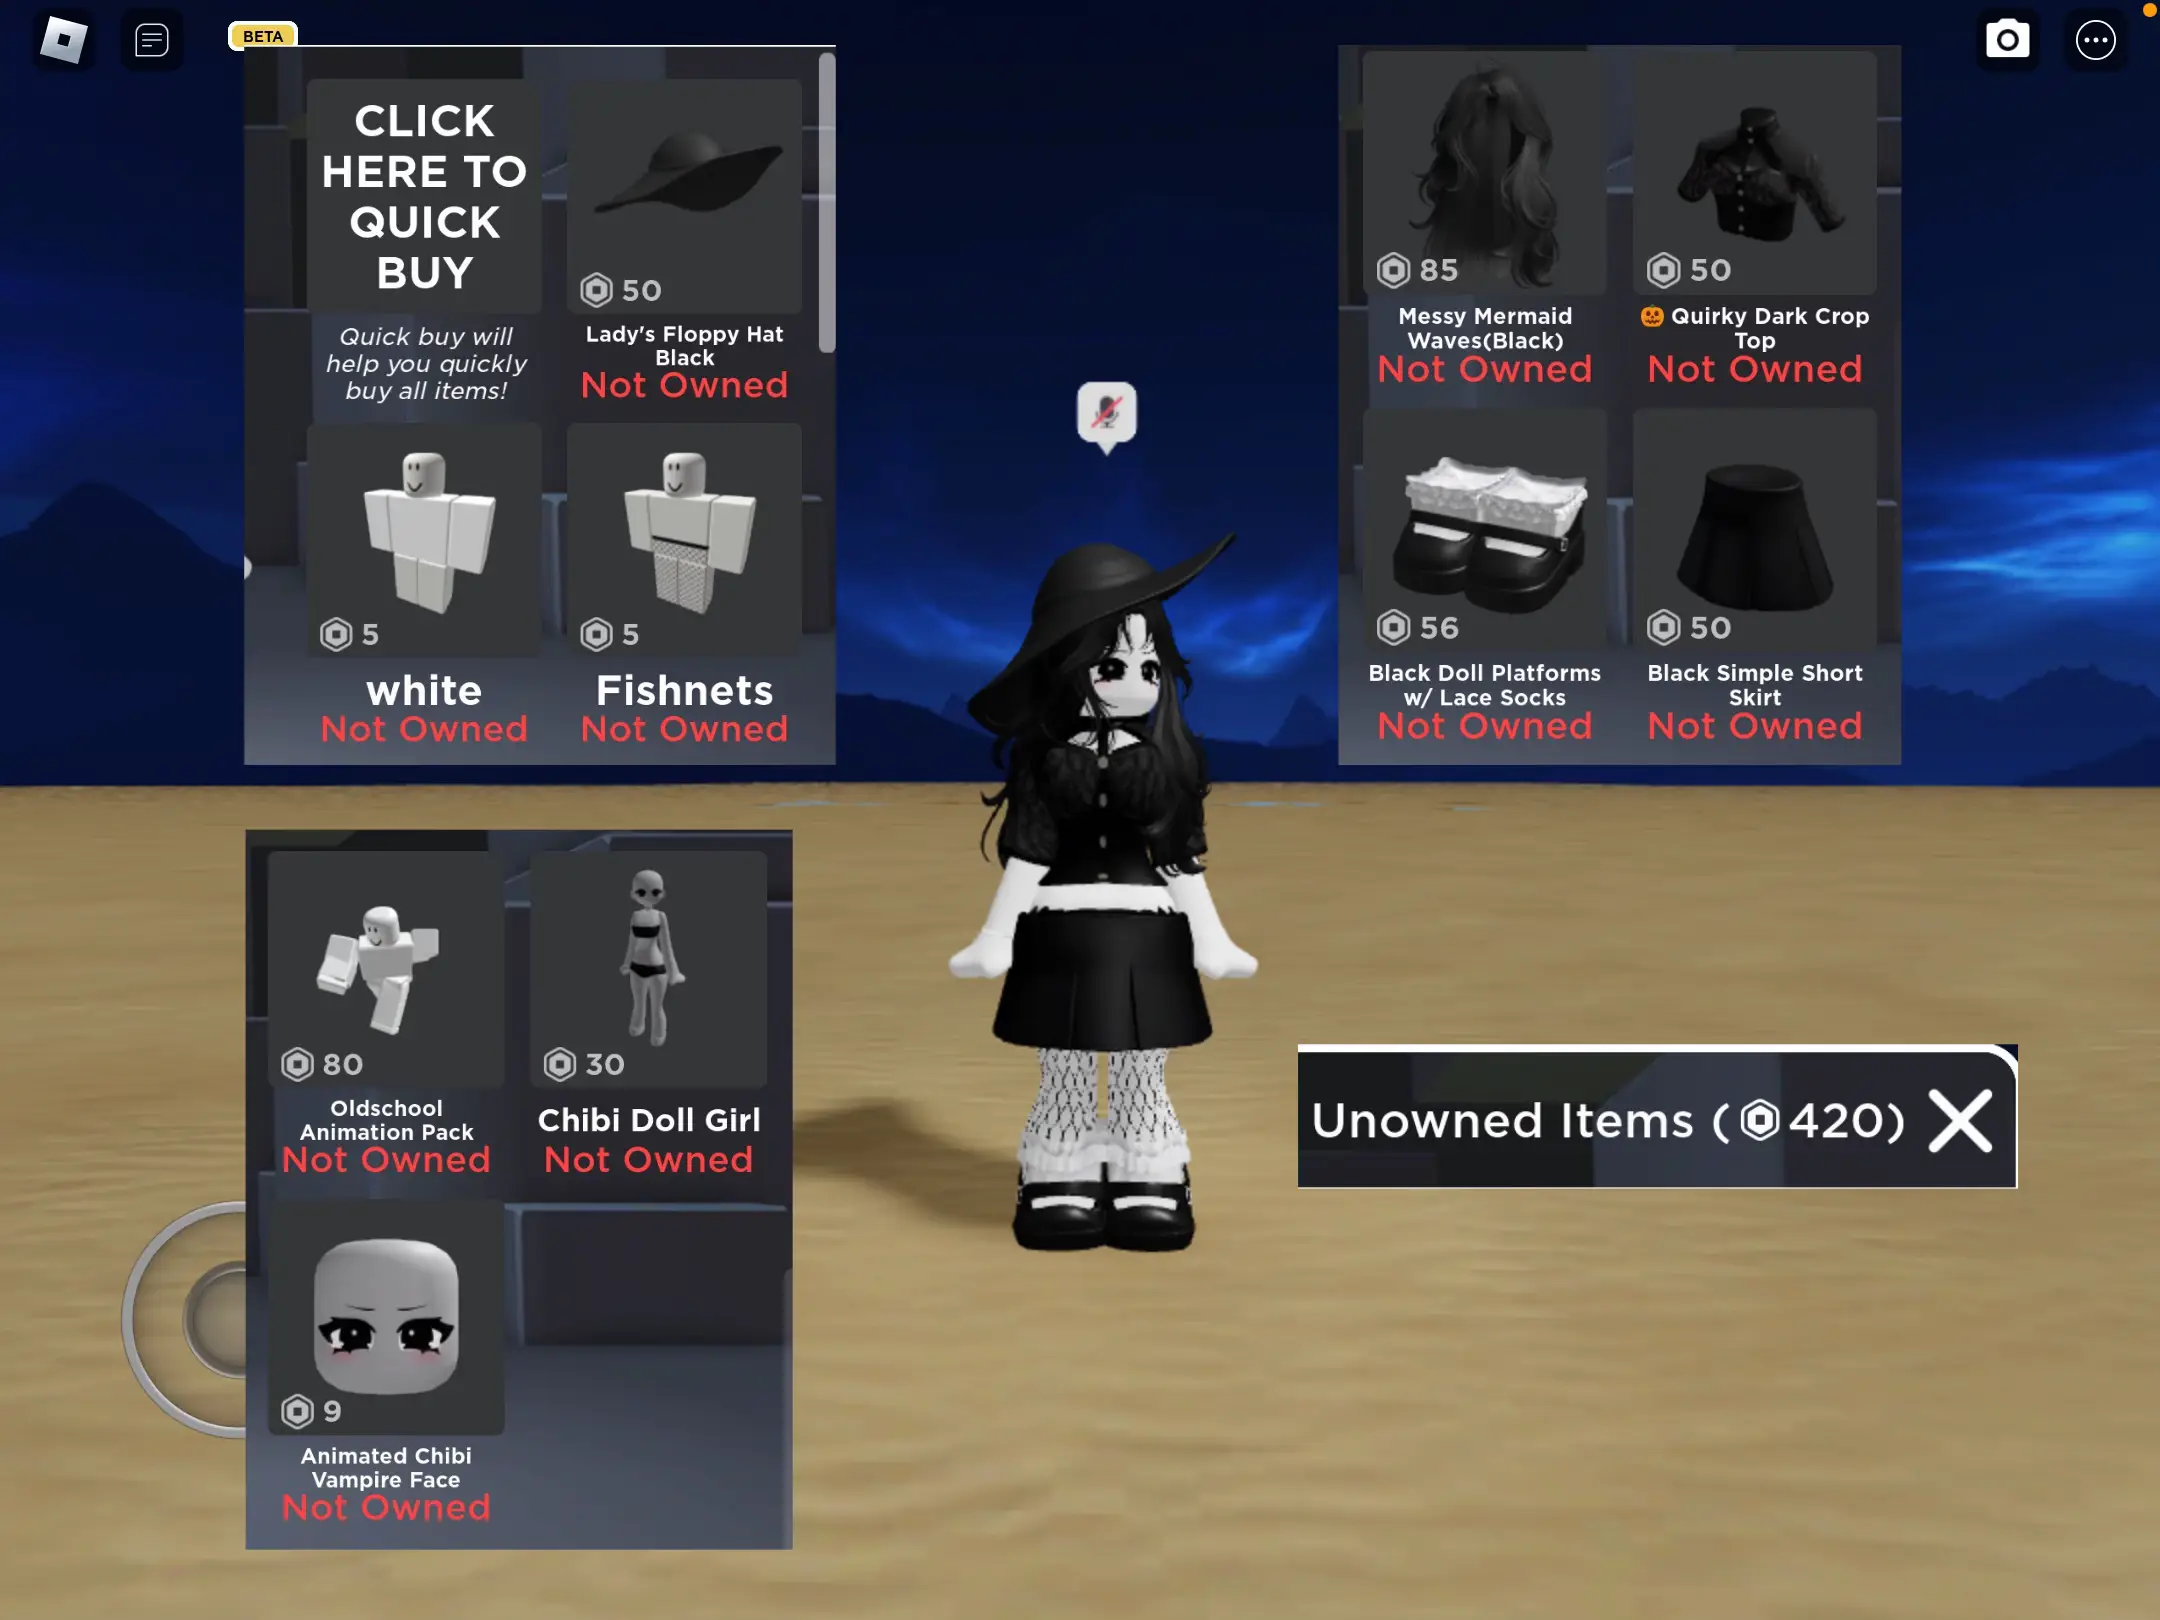 Roblox Girl Outfits, Despite being free, these outfits really look good  enough to impress your friends.